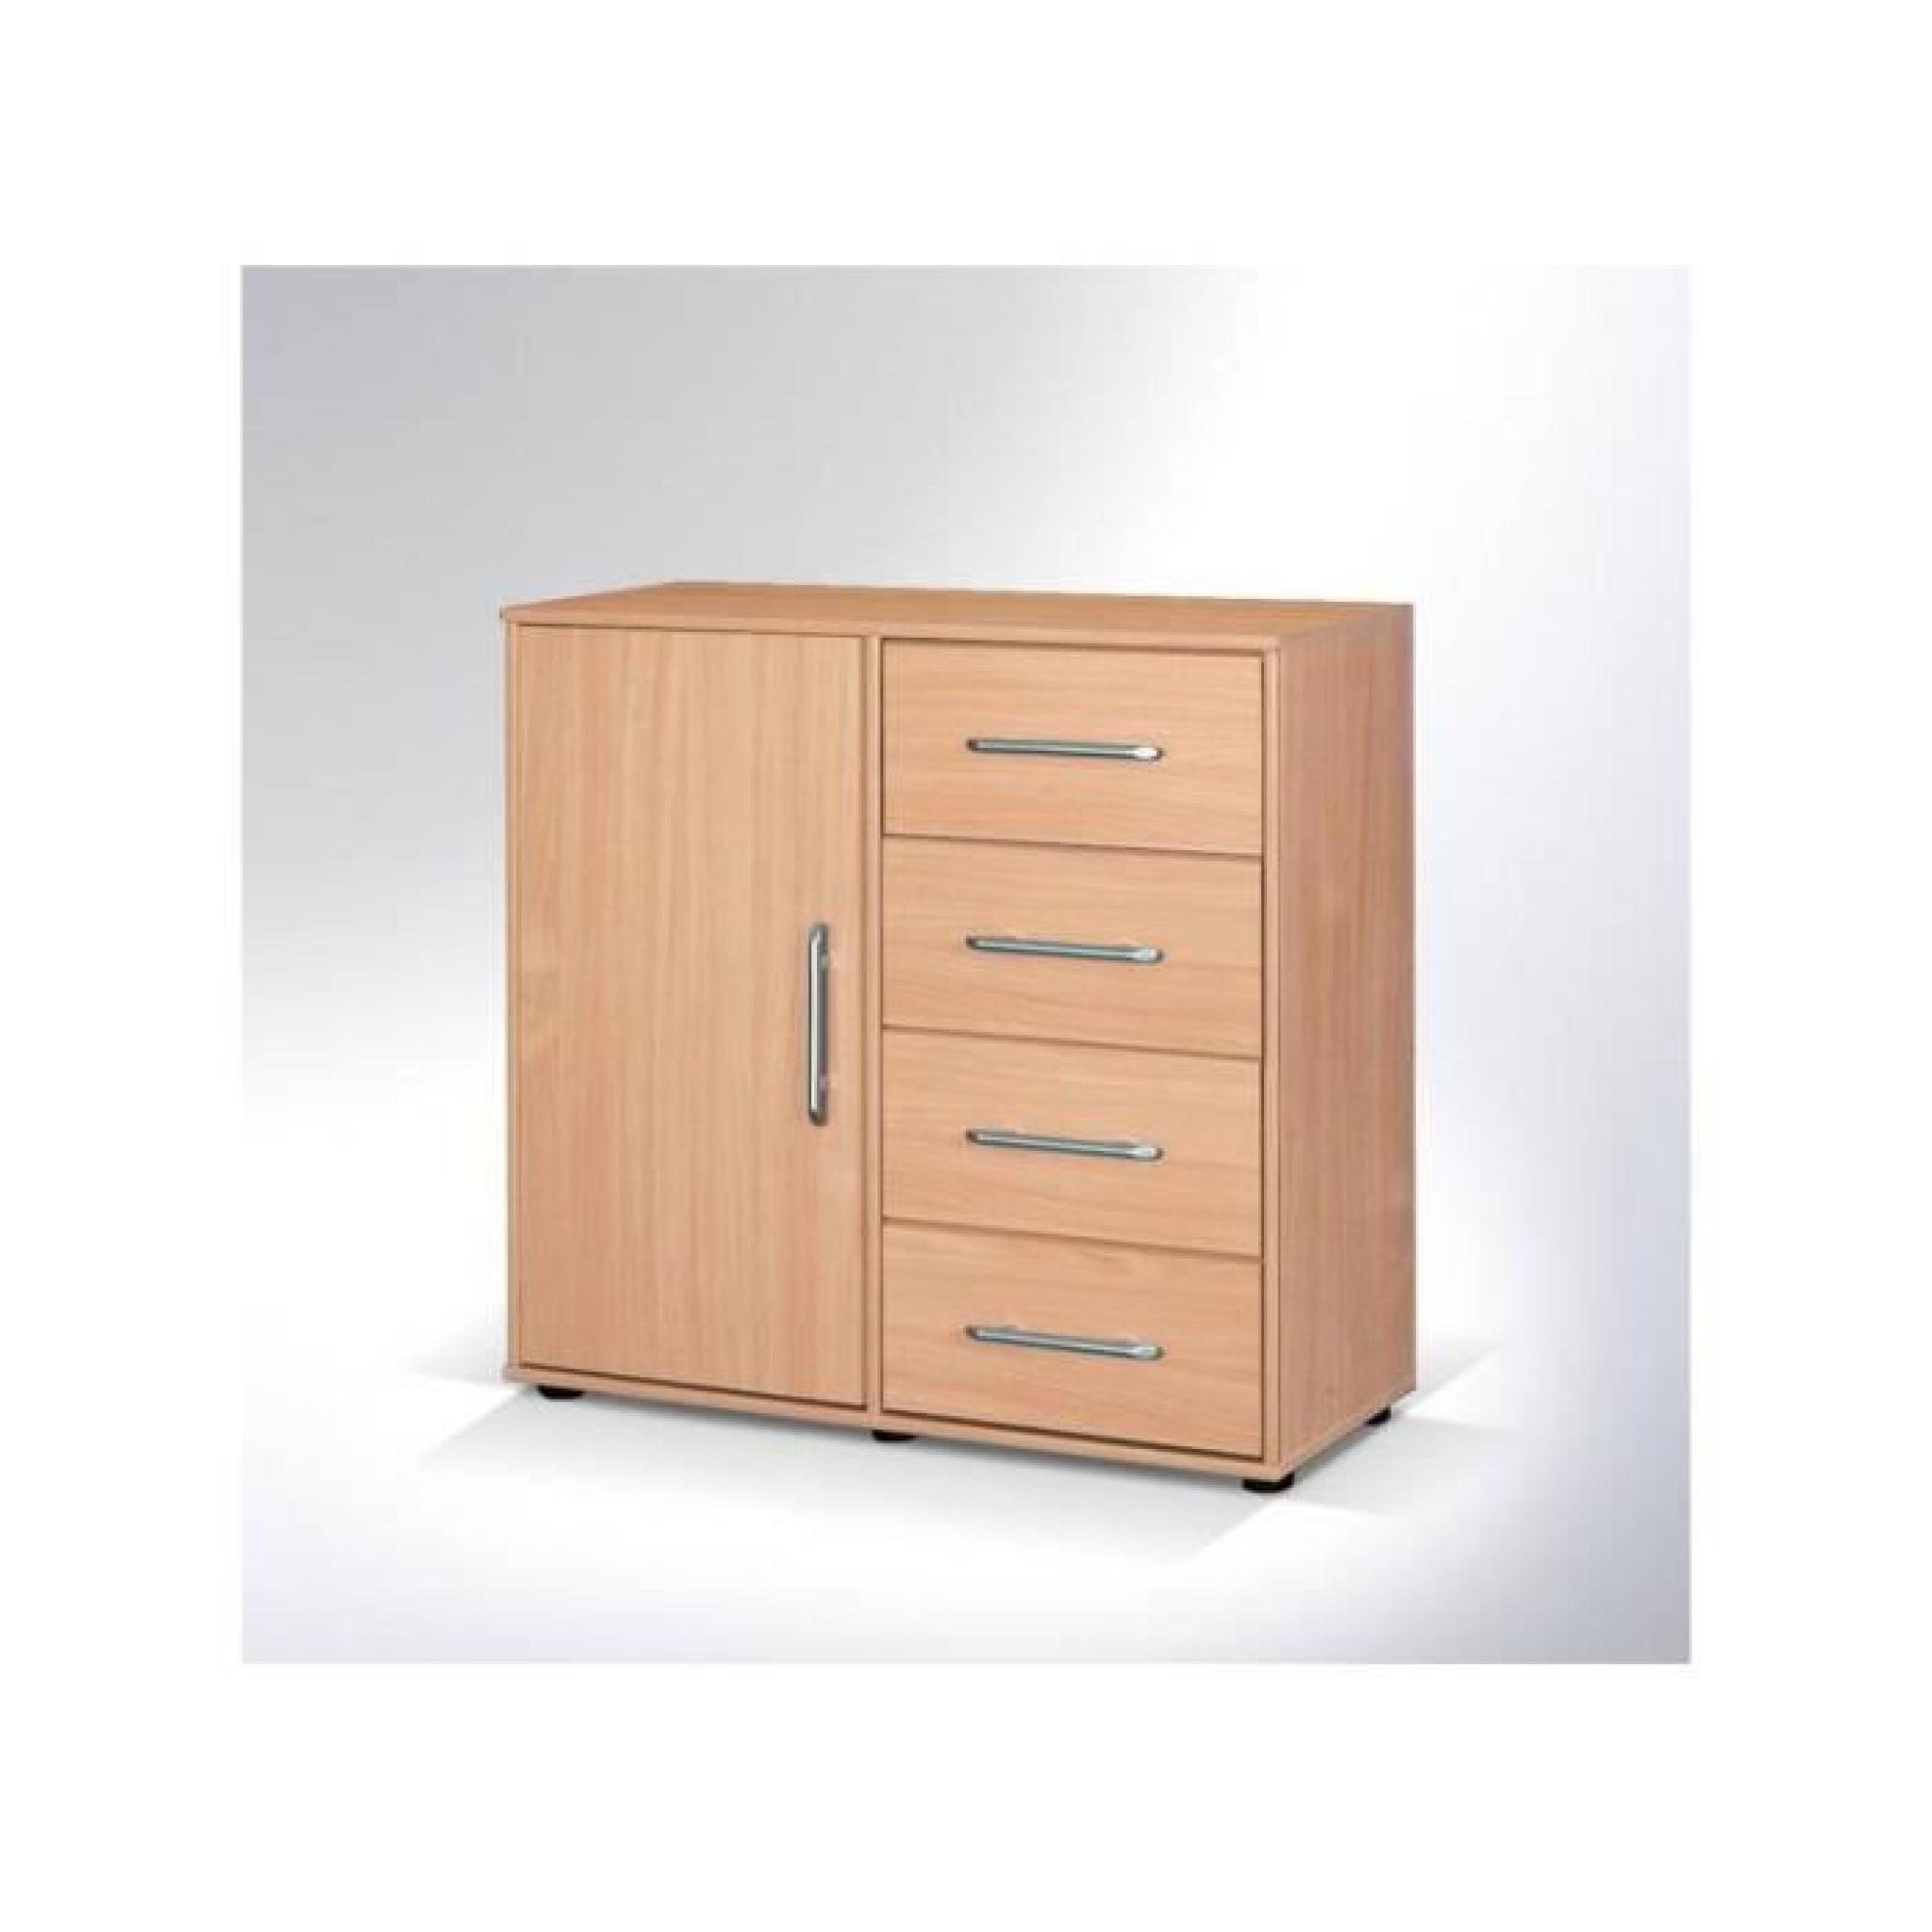 JUSThome Maxion MX XIII Commode Buffet Hêtre 88 x 90 x 35 cm